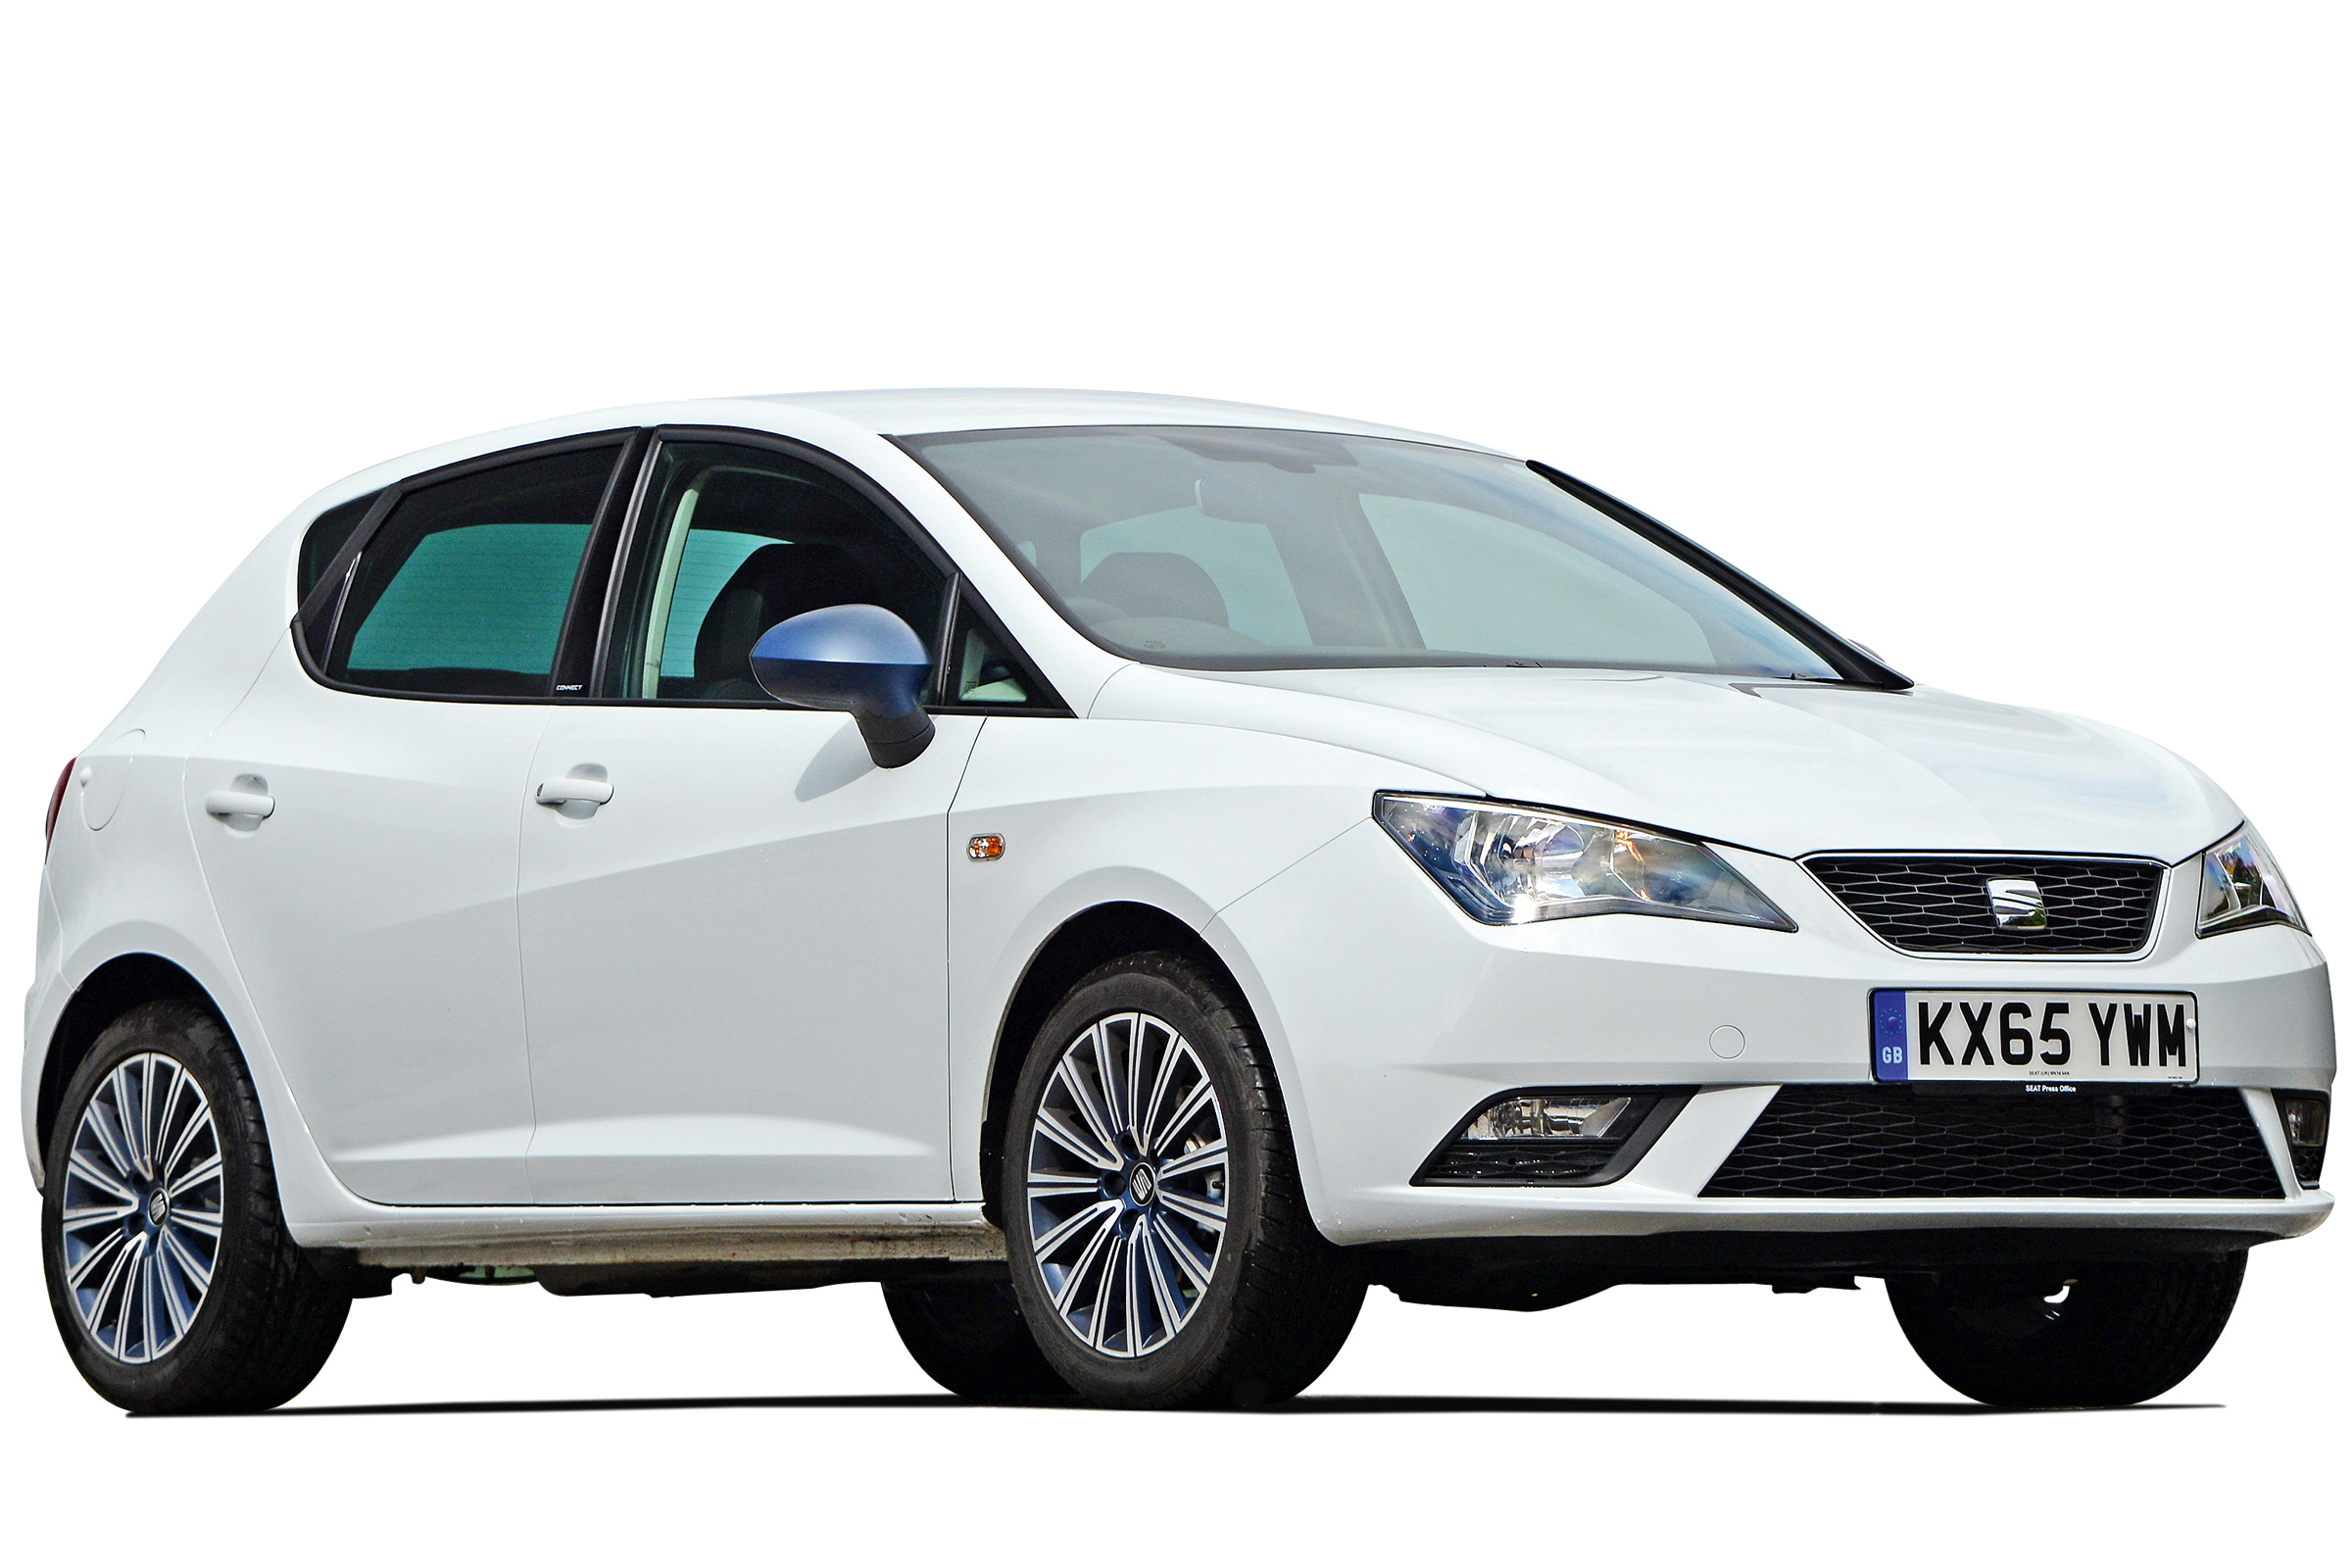 New SEAT Ibiza (2012-2017) Review, Drive, Specs & Pricing